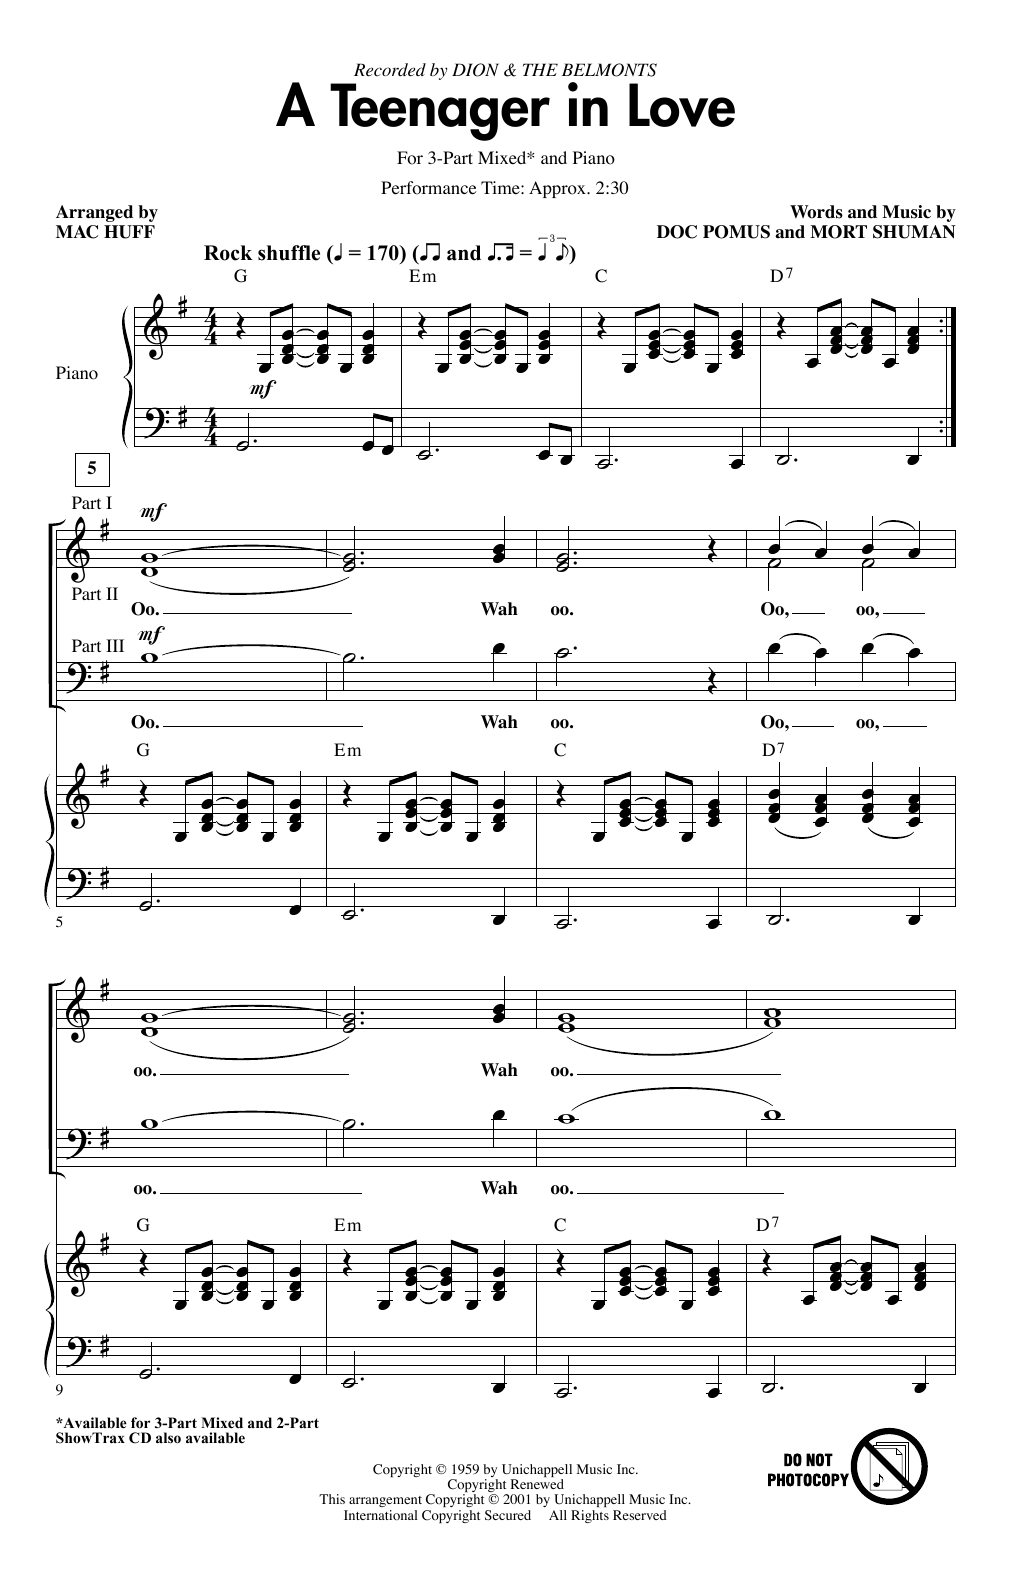 Download Dion & The Belmonts A Teenager In Love (arr. Mac Huff) Sheet Music